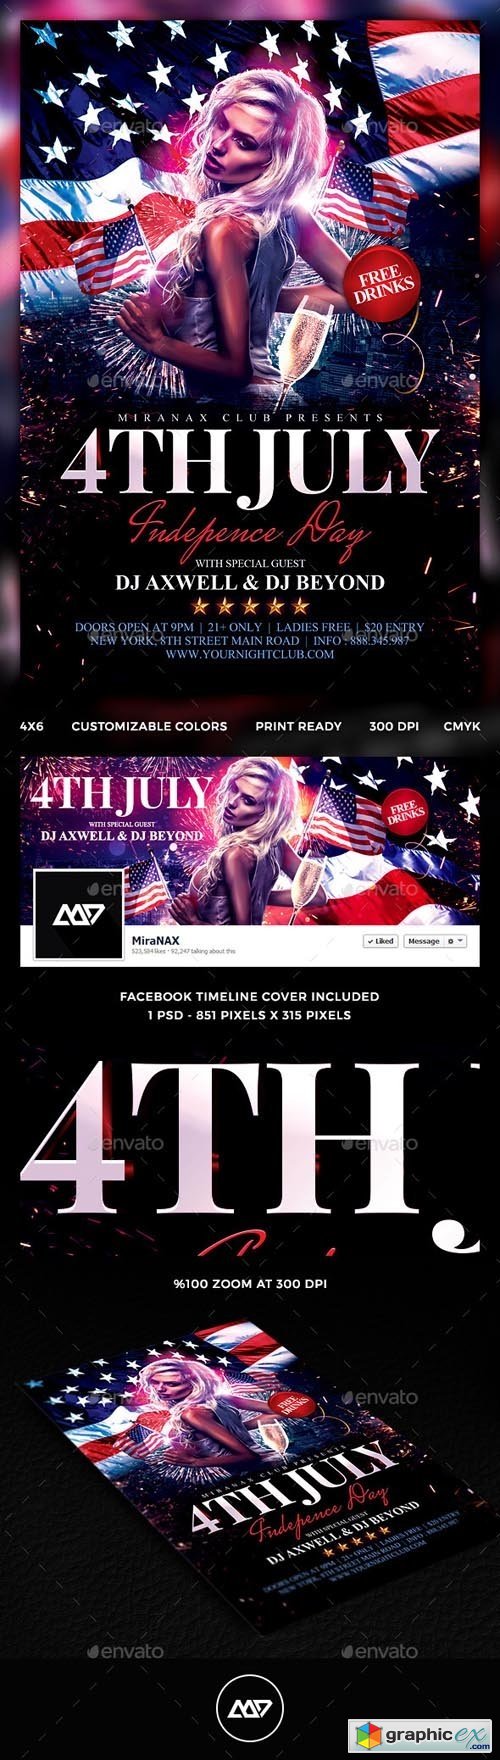 4th of July Flyer Template PSD